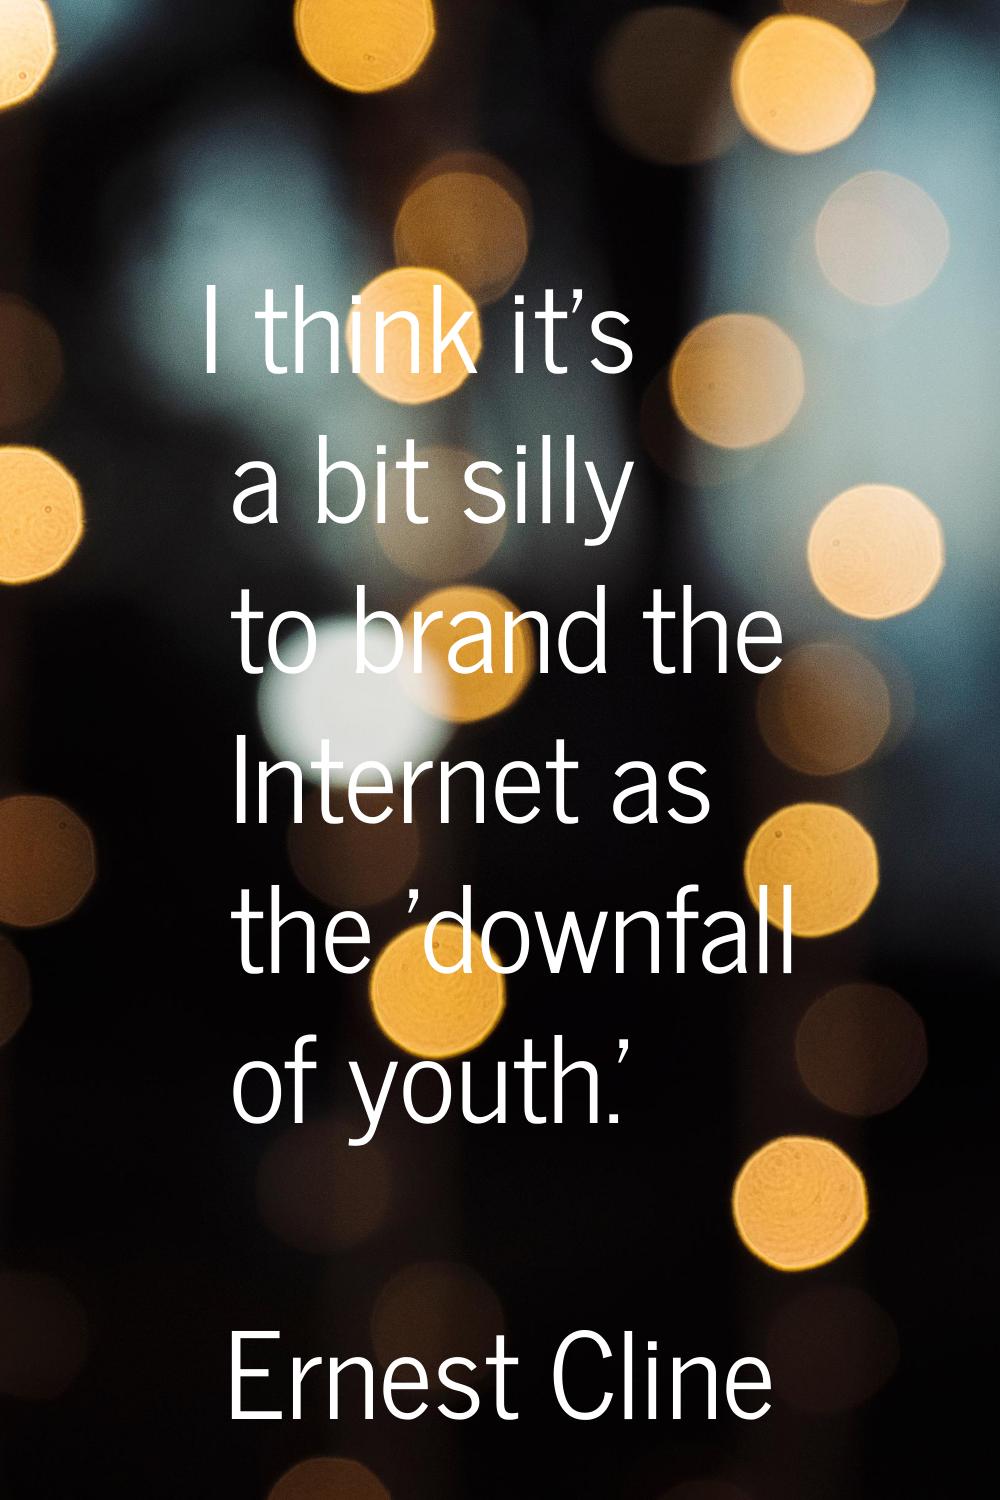 I think it's a bit silly to brand the Internet as the 'downfall of youth.'